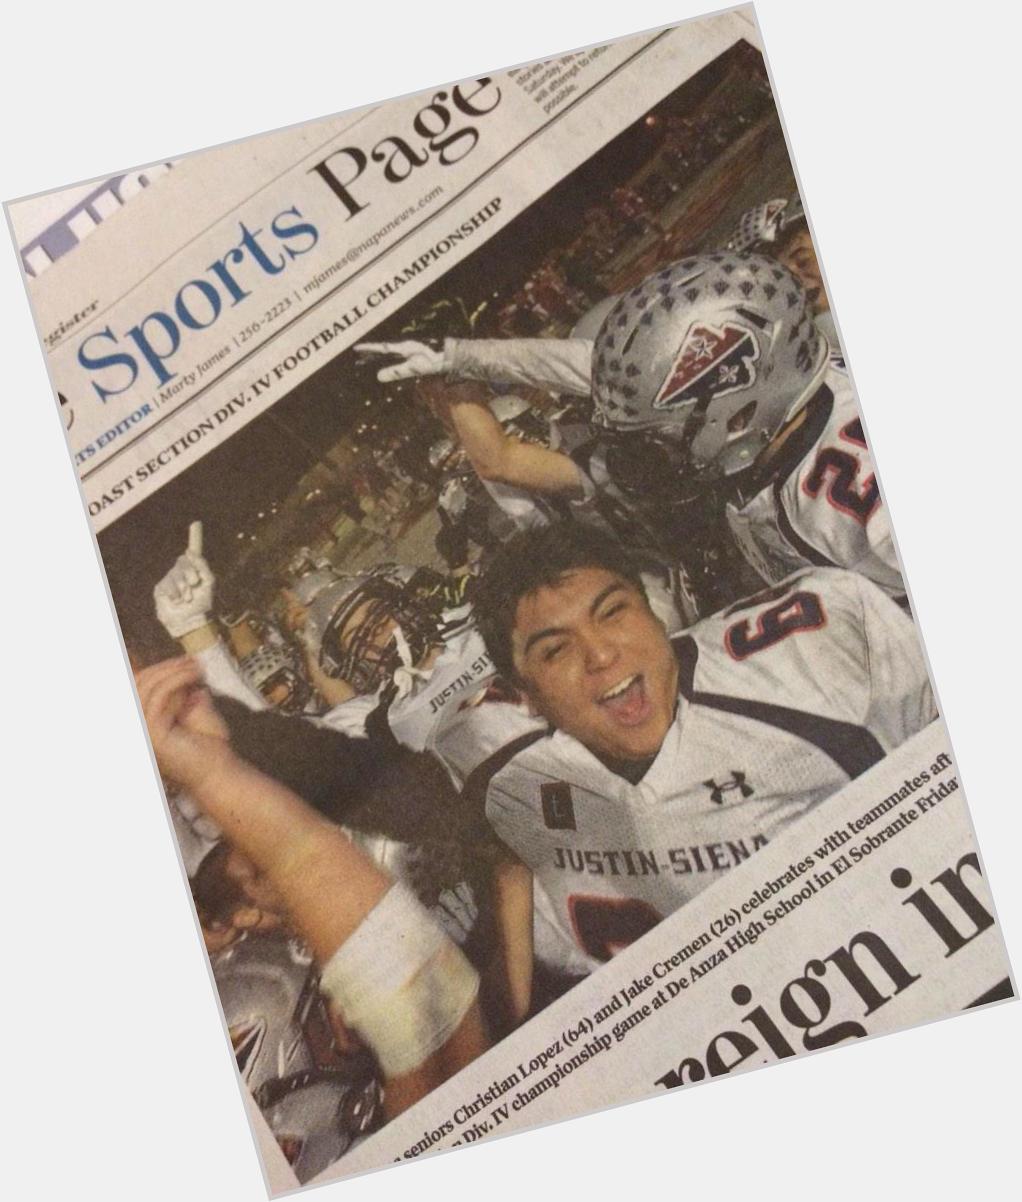 Happy Birthday big boi. When it was really d4 but you act like it was d1 for the \"paper\" 